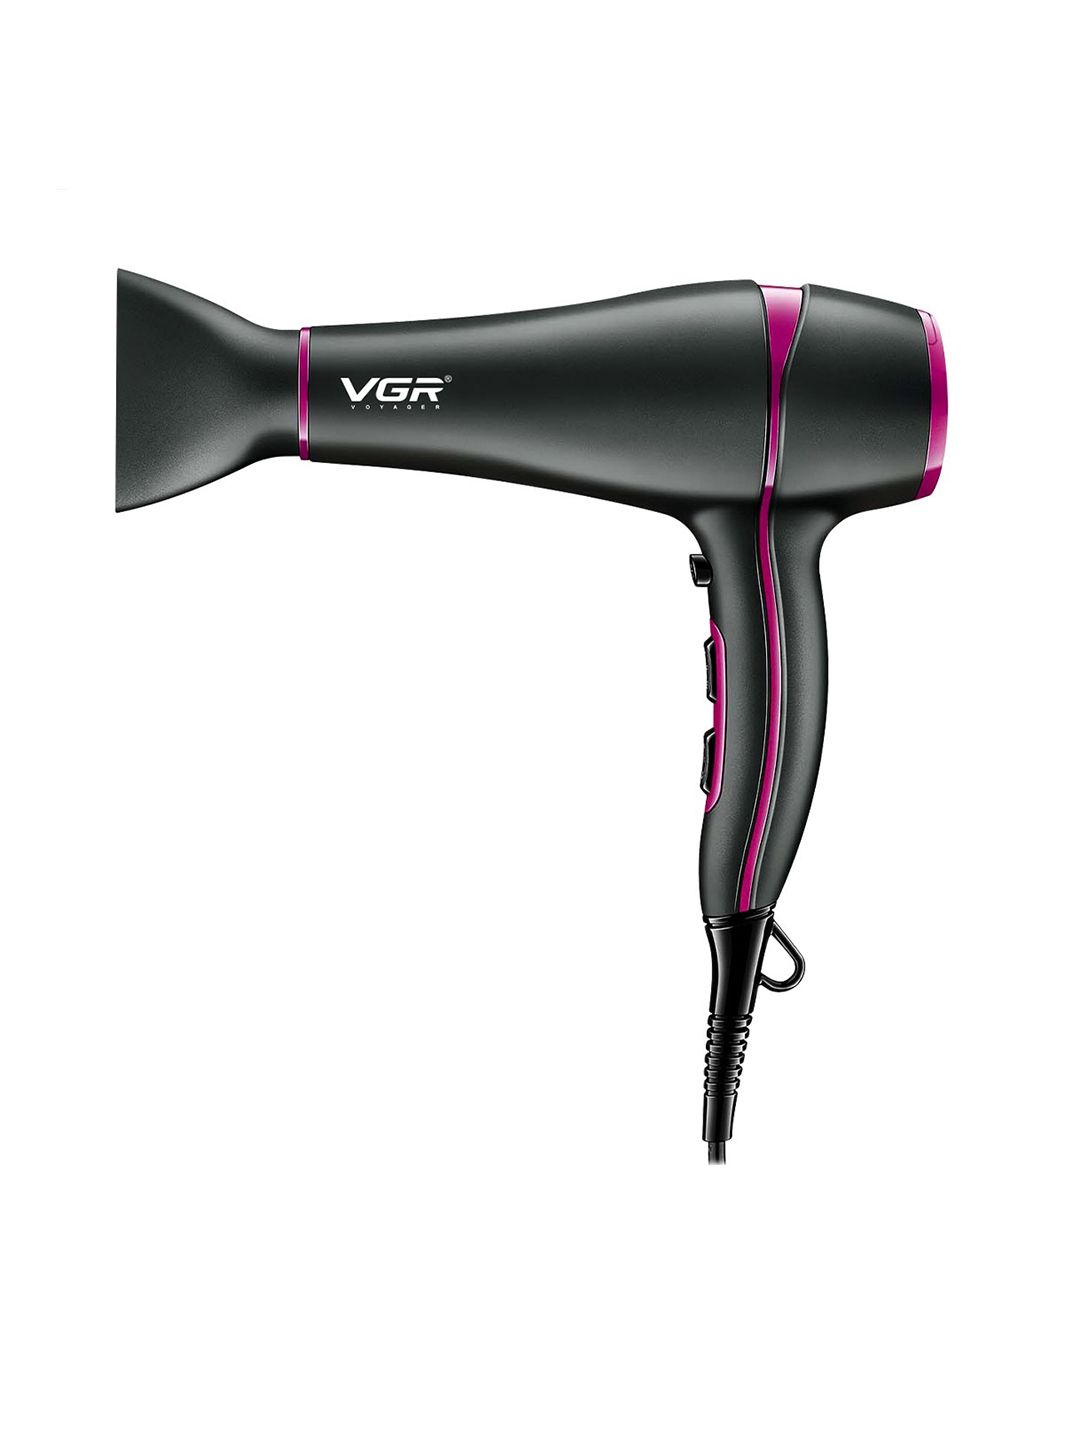 VGR Professional Hair Dryer 1800-2200W With 3 Heat Setting & 2 Speed Settings Price in India